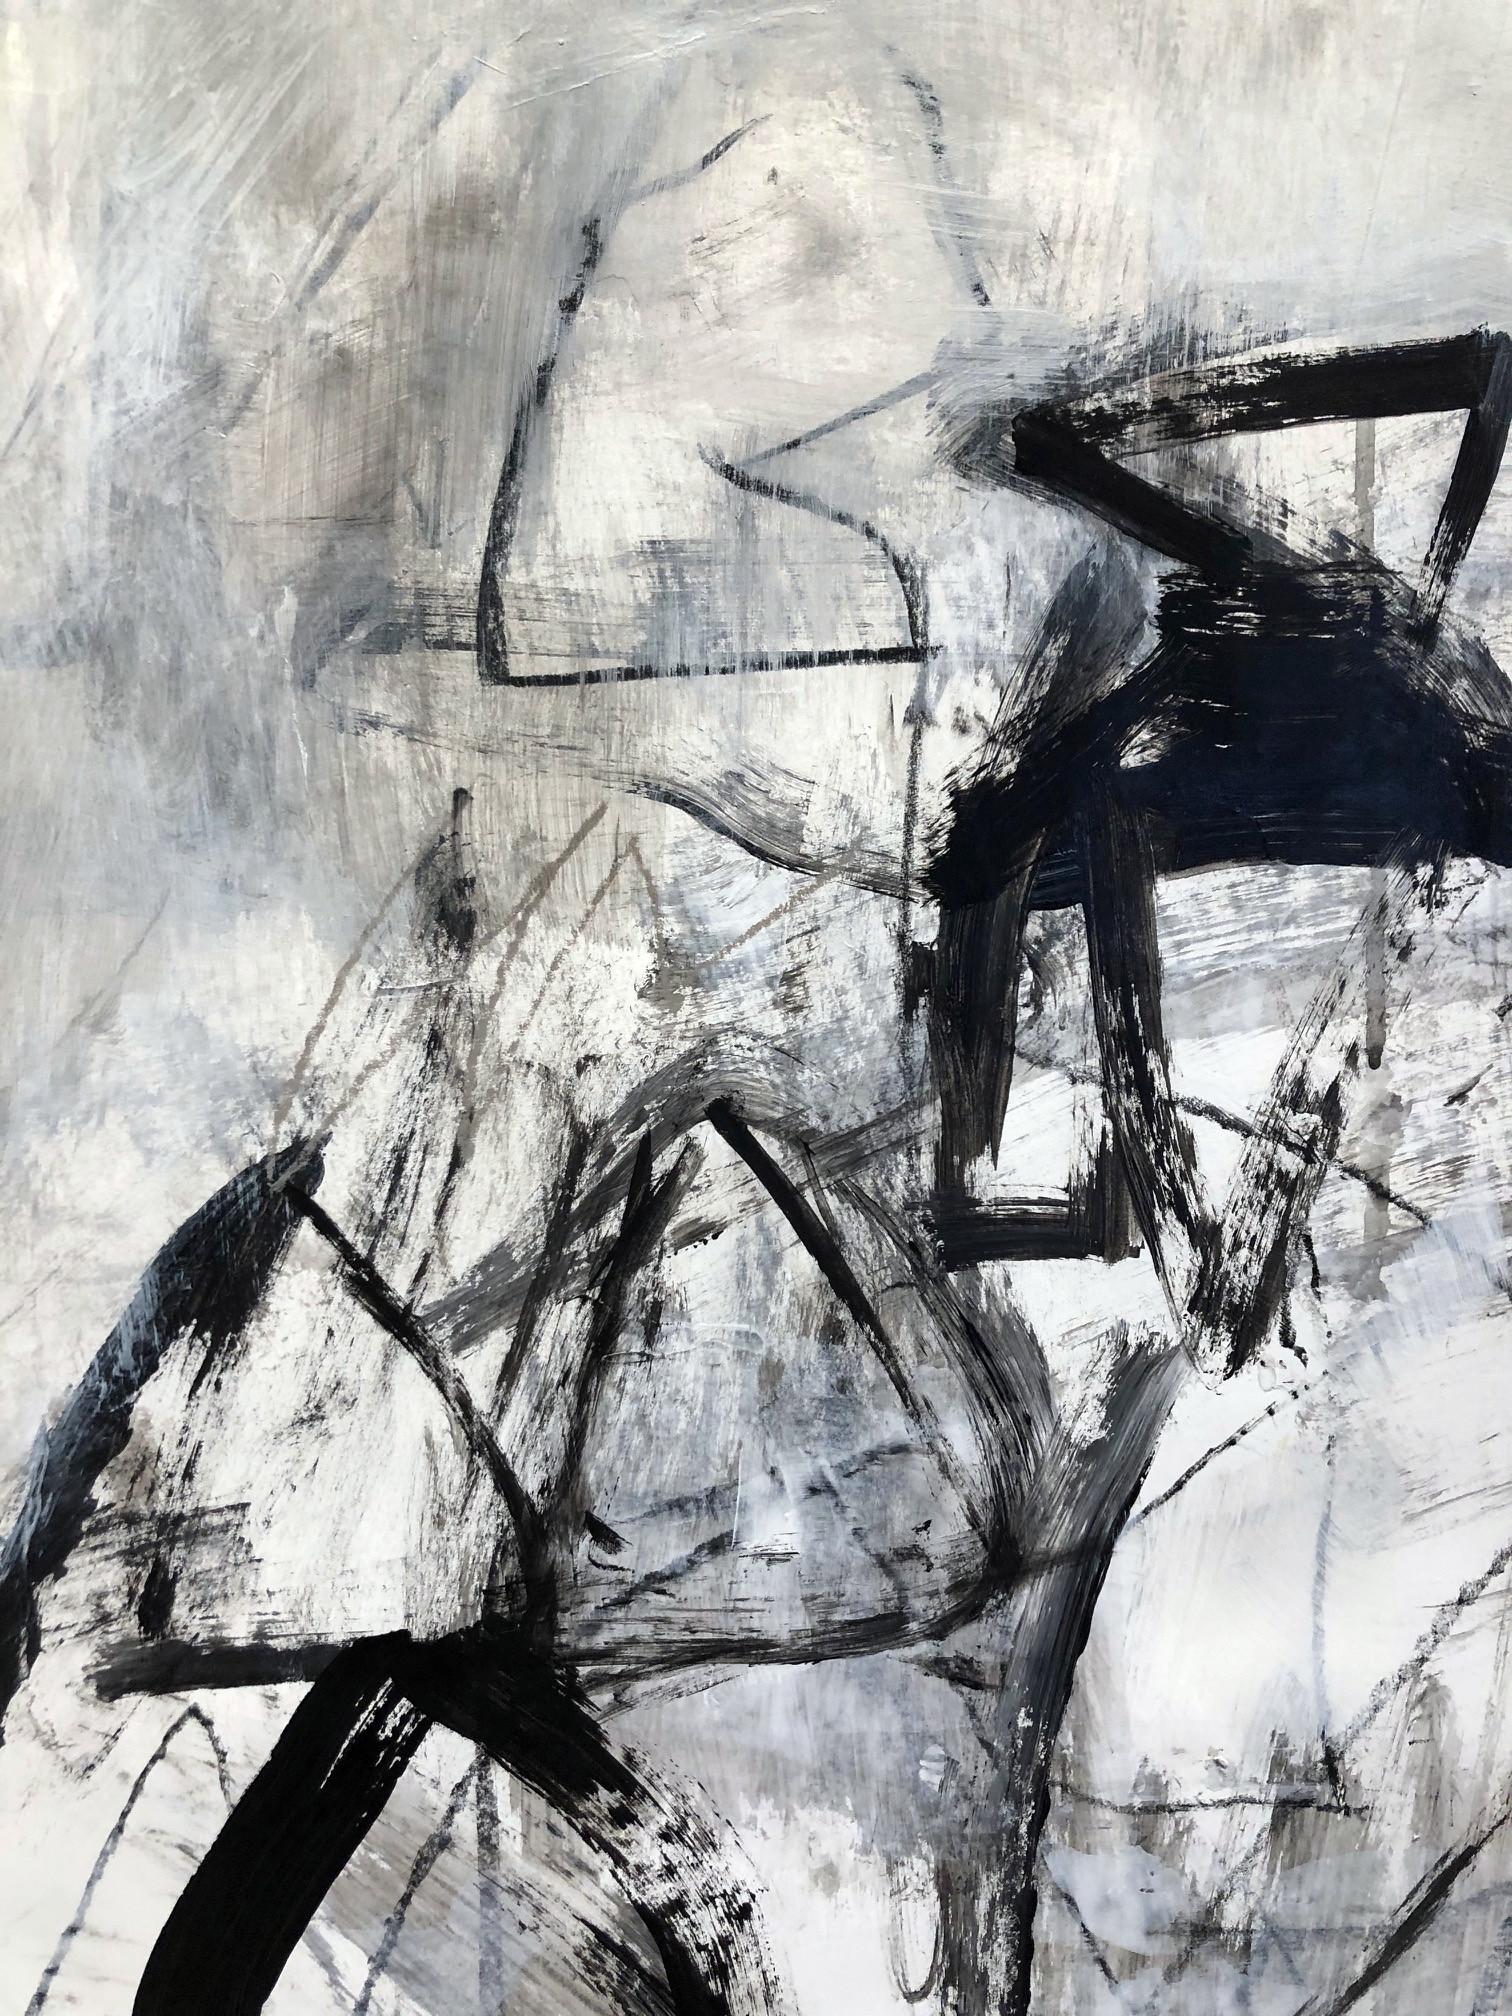 Resonate II, mixed media on paper, 40 X 30    $2200
 Abstract using soft grays and black.
For exact shipping costs, please give location.
comes unframed.

About the Artist: Julie Schumer, a native of Los Angeles, California, and born in 1954, lives